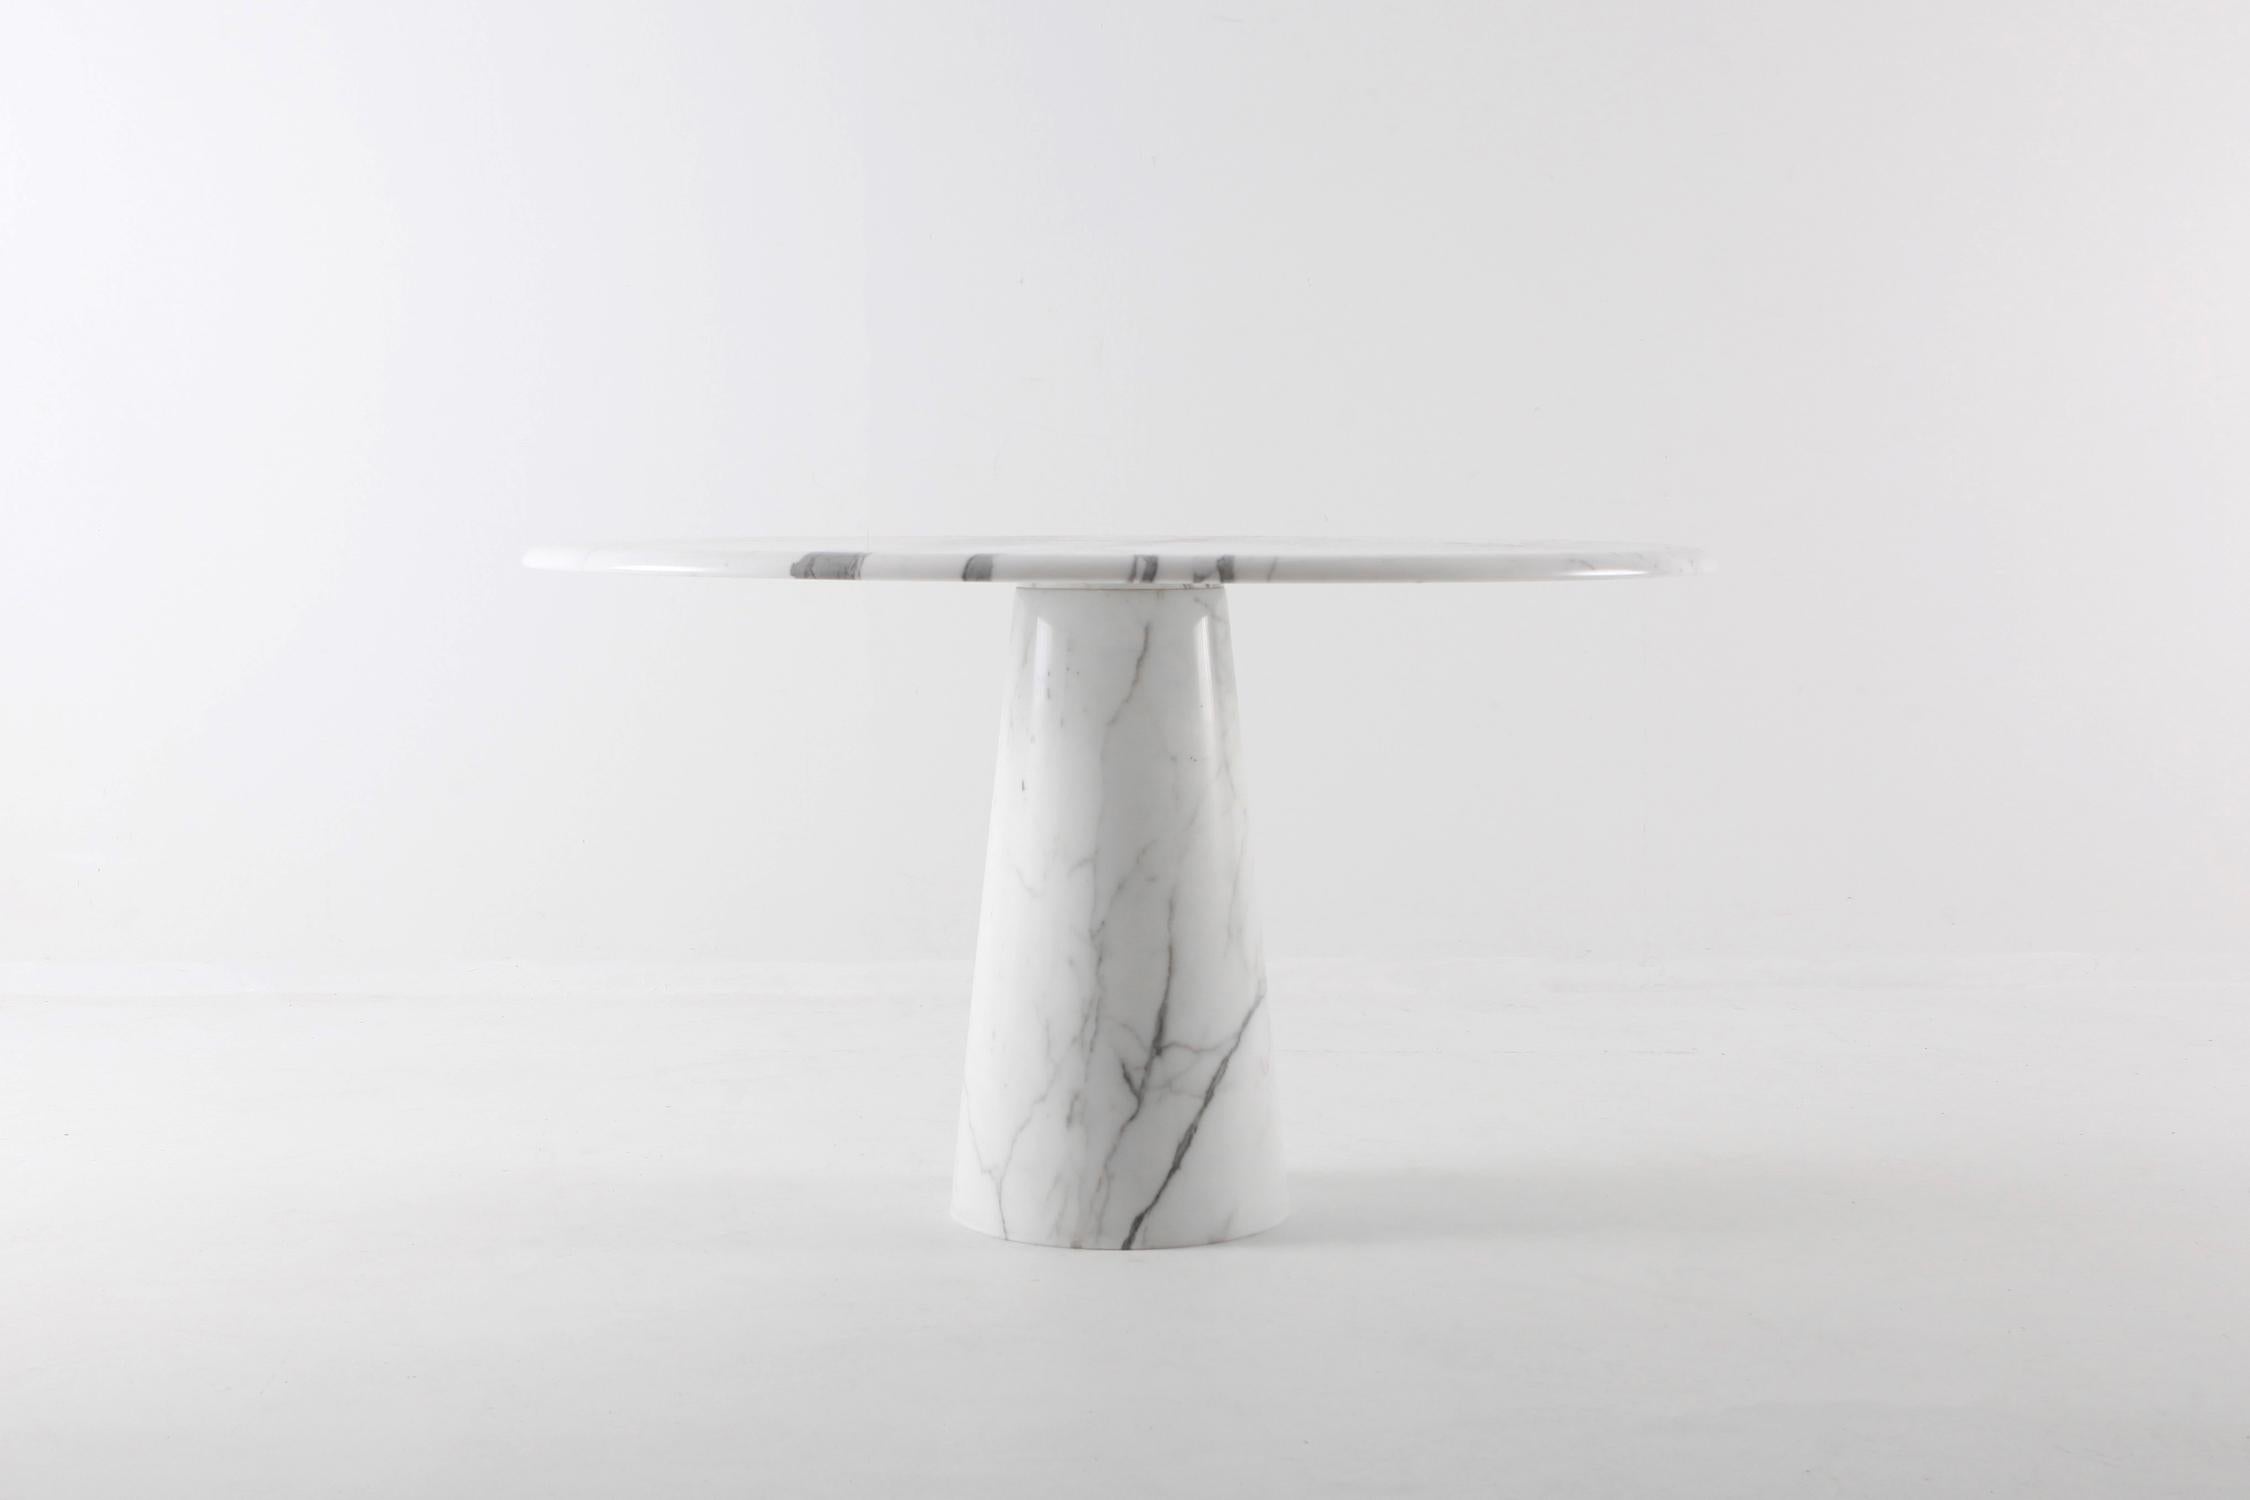 round carrara marble dining table